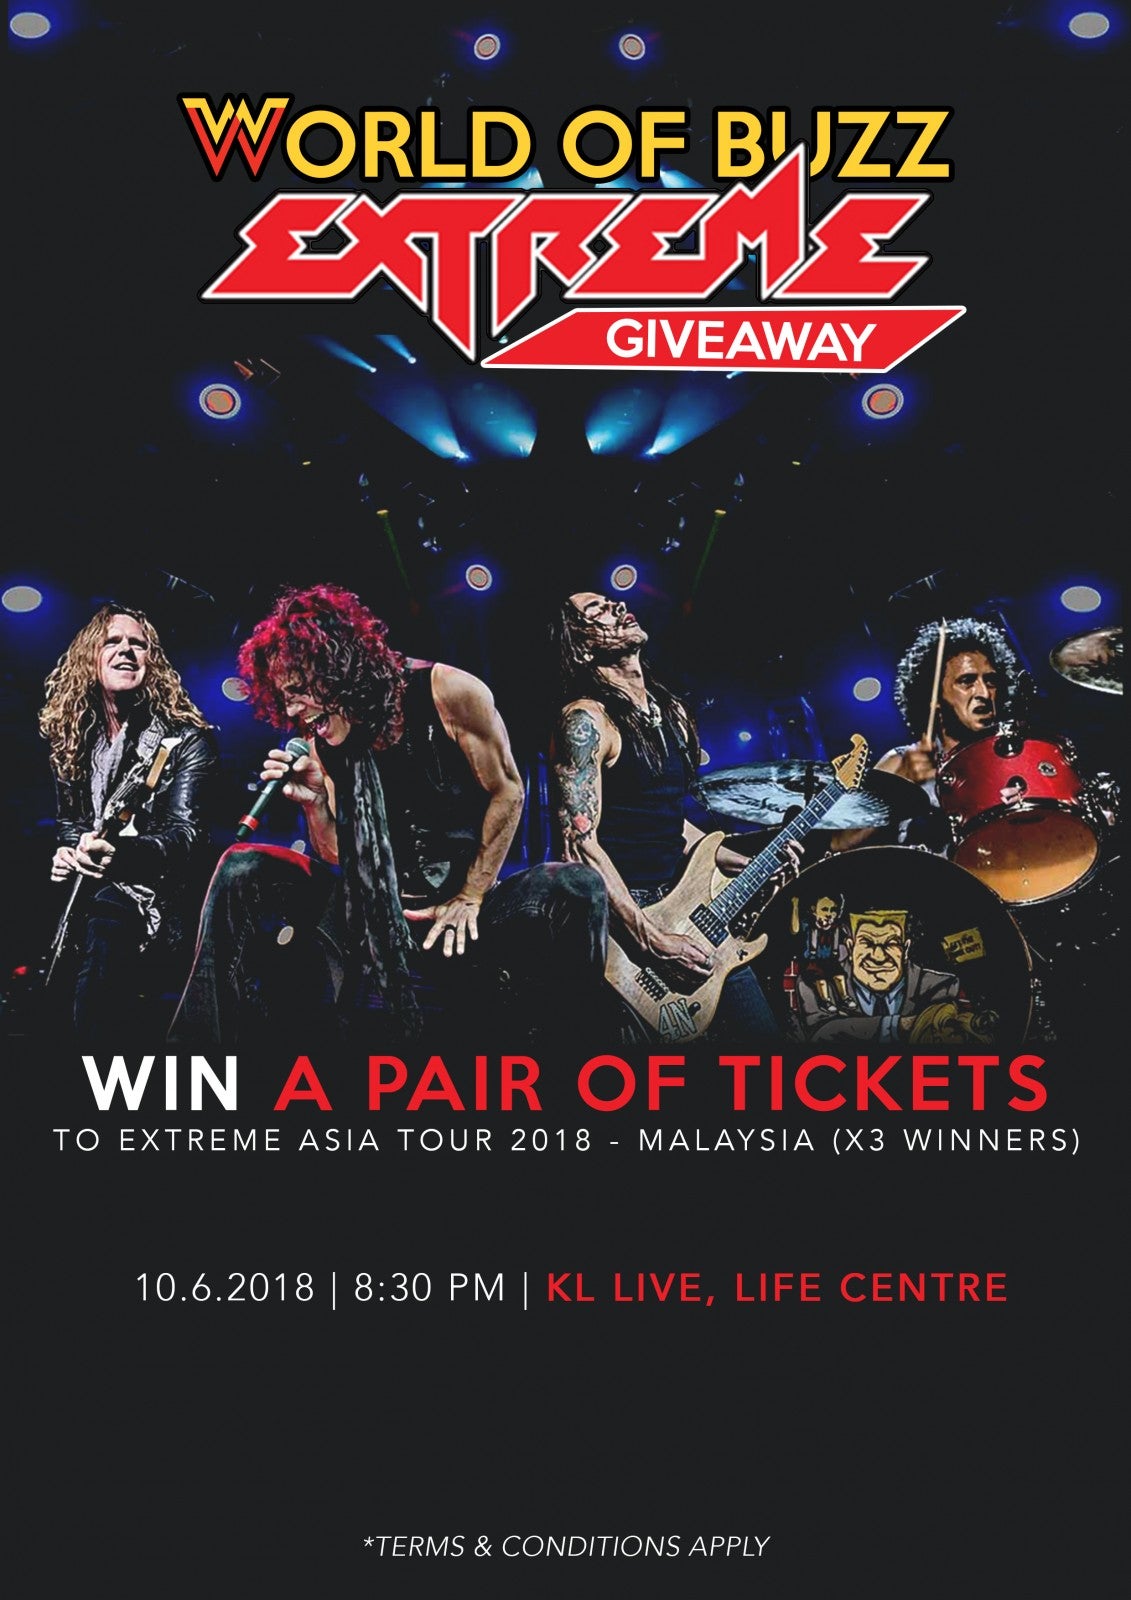 TEST - [GIVEAWAY] Win FREE Concert Tickets to EXTREME Asia Tour 2018 - Malaysia! - WORLD OF BUZZ